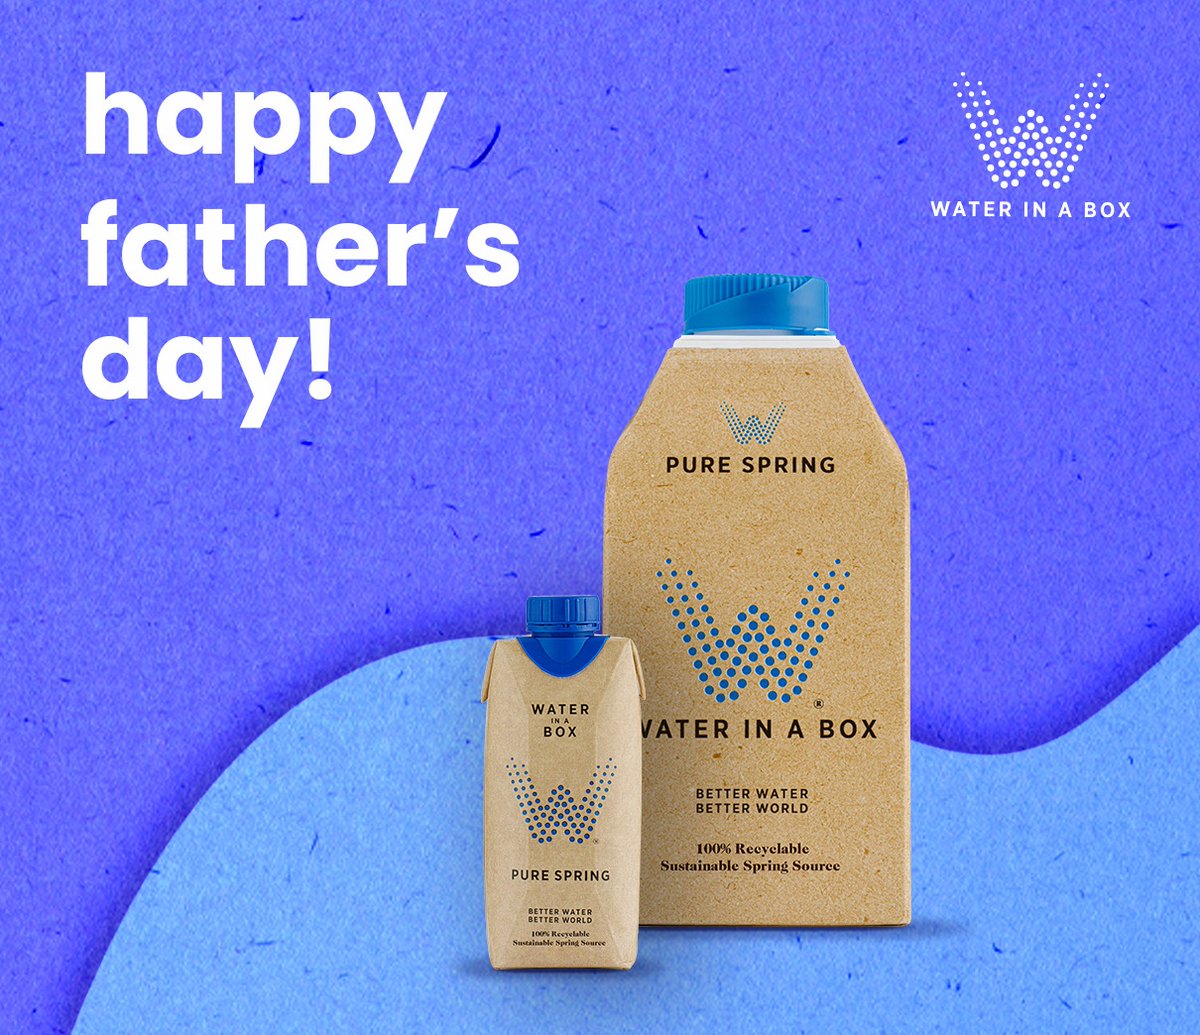 Happy Father’s Day!

From all of us at Water In A Box, we wish all the fathers (and father figures) a sustainably special day filled with amazing memories 💙

#HappyFathersDay #FathersDay #Sustainability #SustainableWater